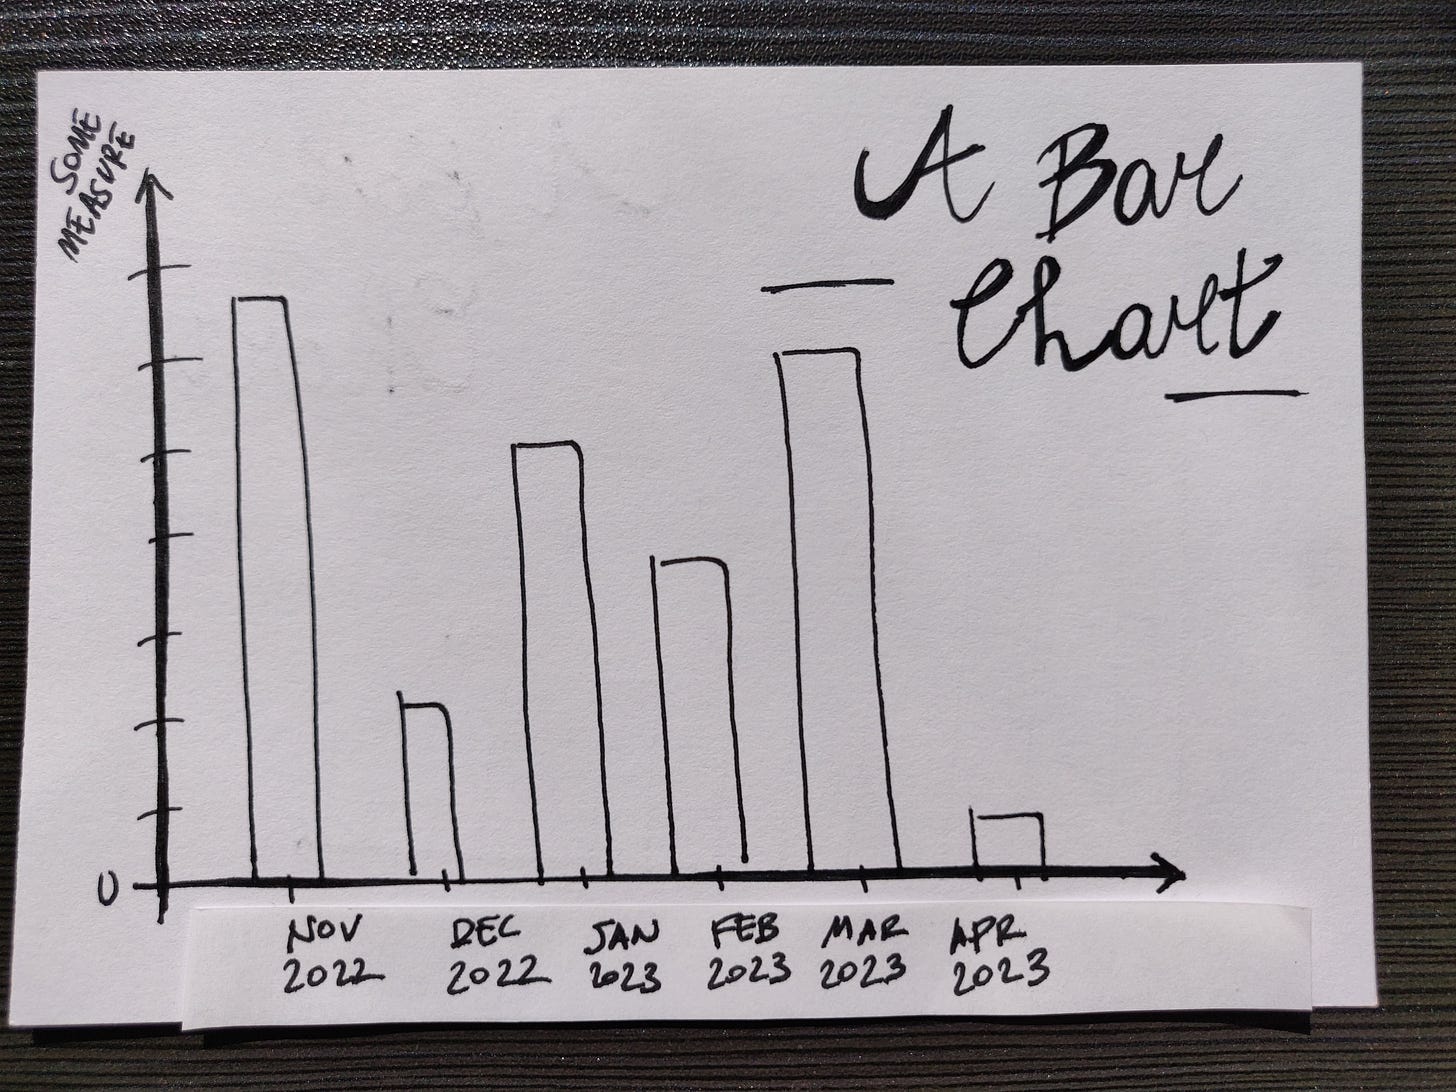 A plain bar chart with months on the x-axis